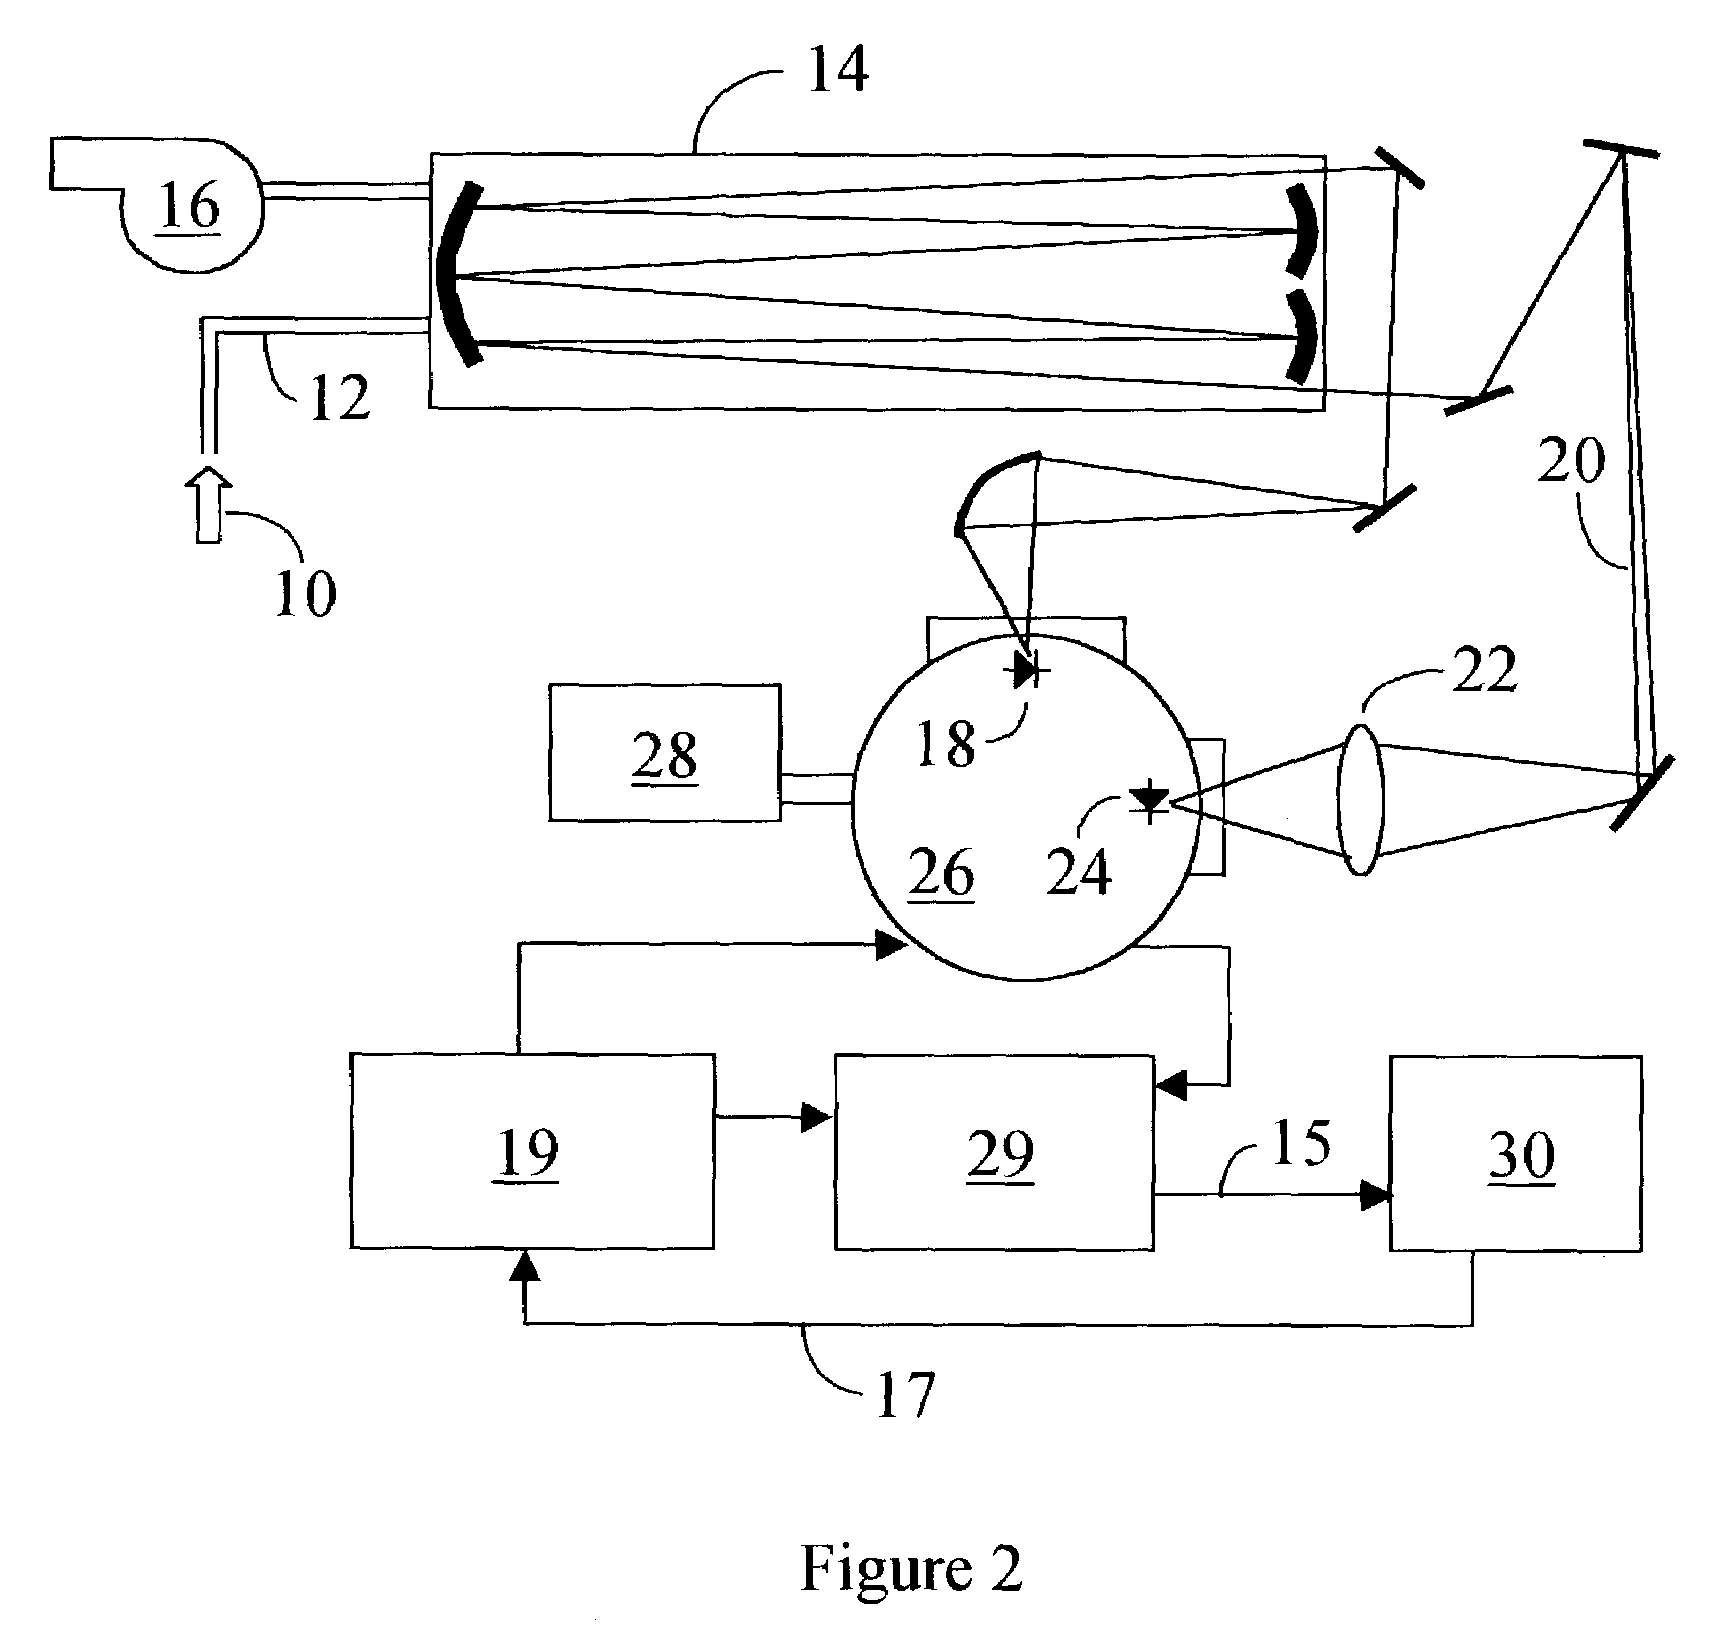 Method and apparatus for determining marker gas concentration in exhaled breath using an internal calibrating gas